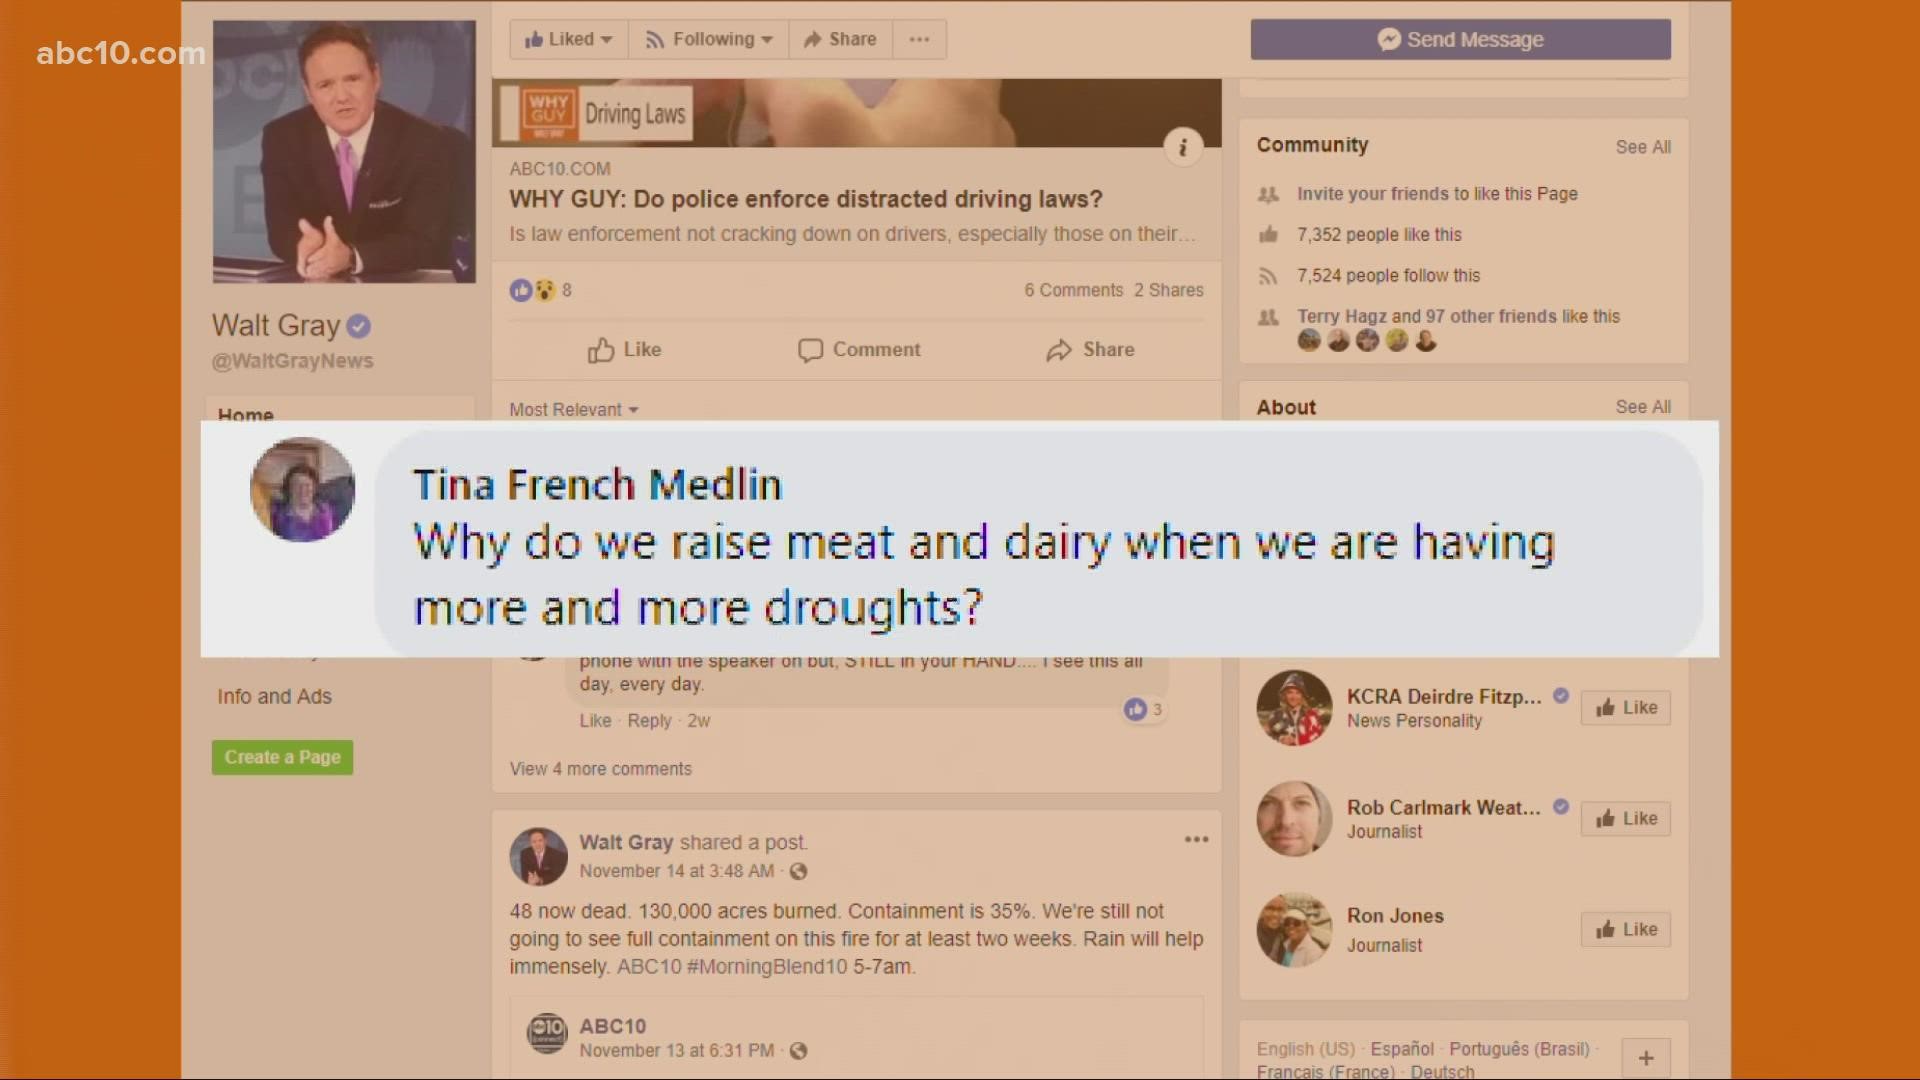 In today's edition of Why Guy, Walt Gray answers a viewer's question about why California raises meat and dairy.